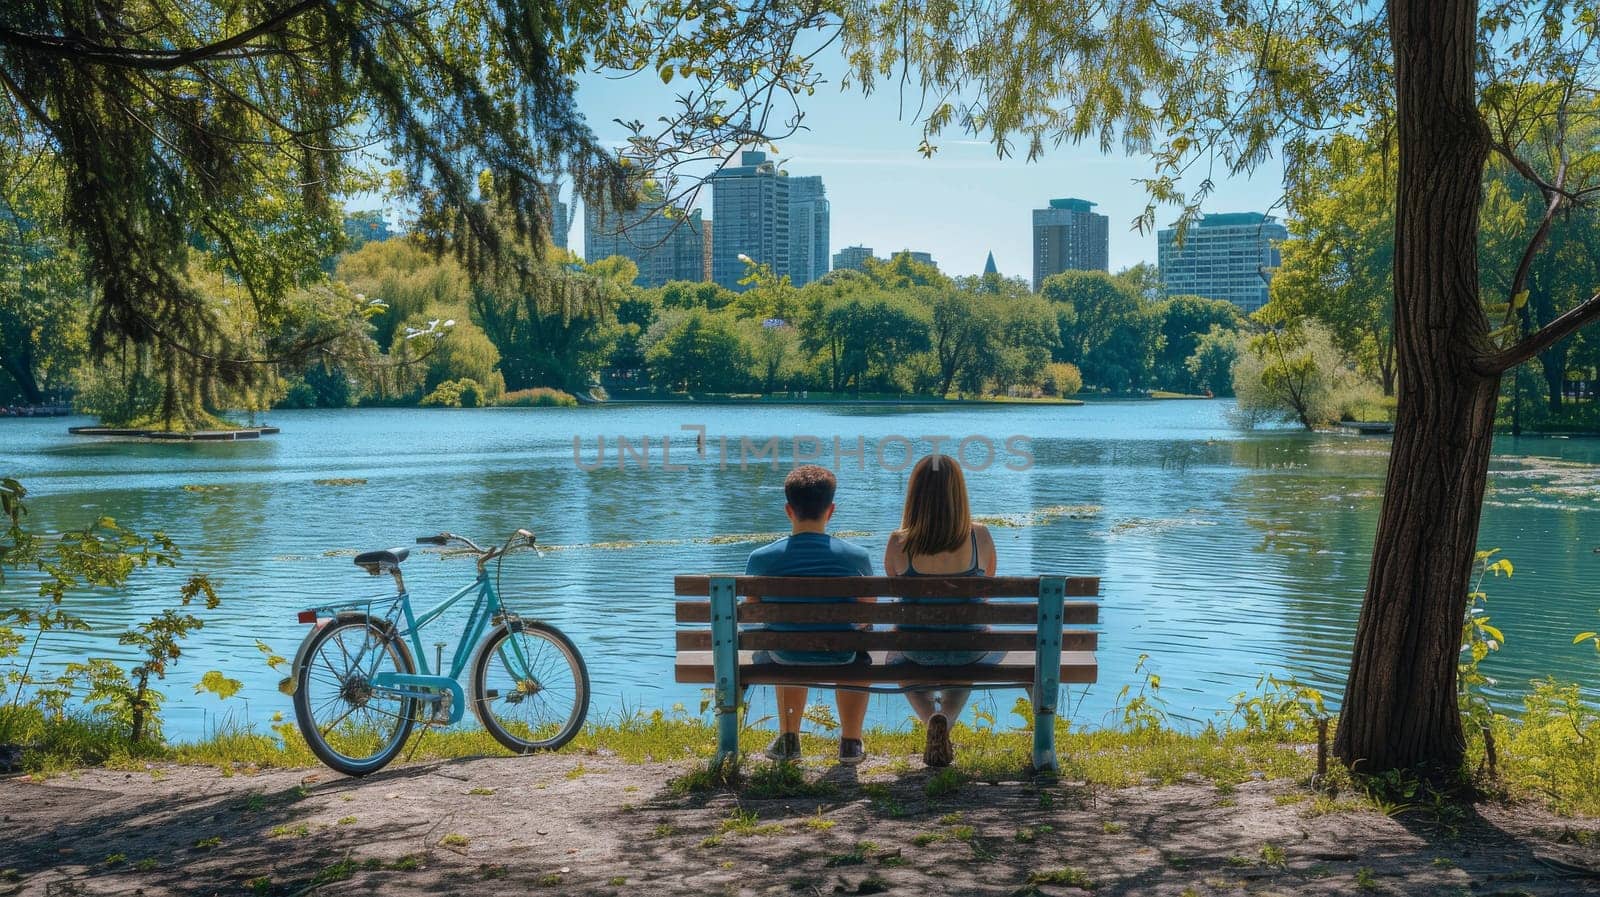 Two people are sitting on a bench by a lake. The lake is calm and peaceful, and the trees surrounding it provide a serene atmosphere. The couple is enjoying the view and each other's company